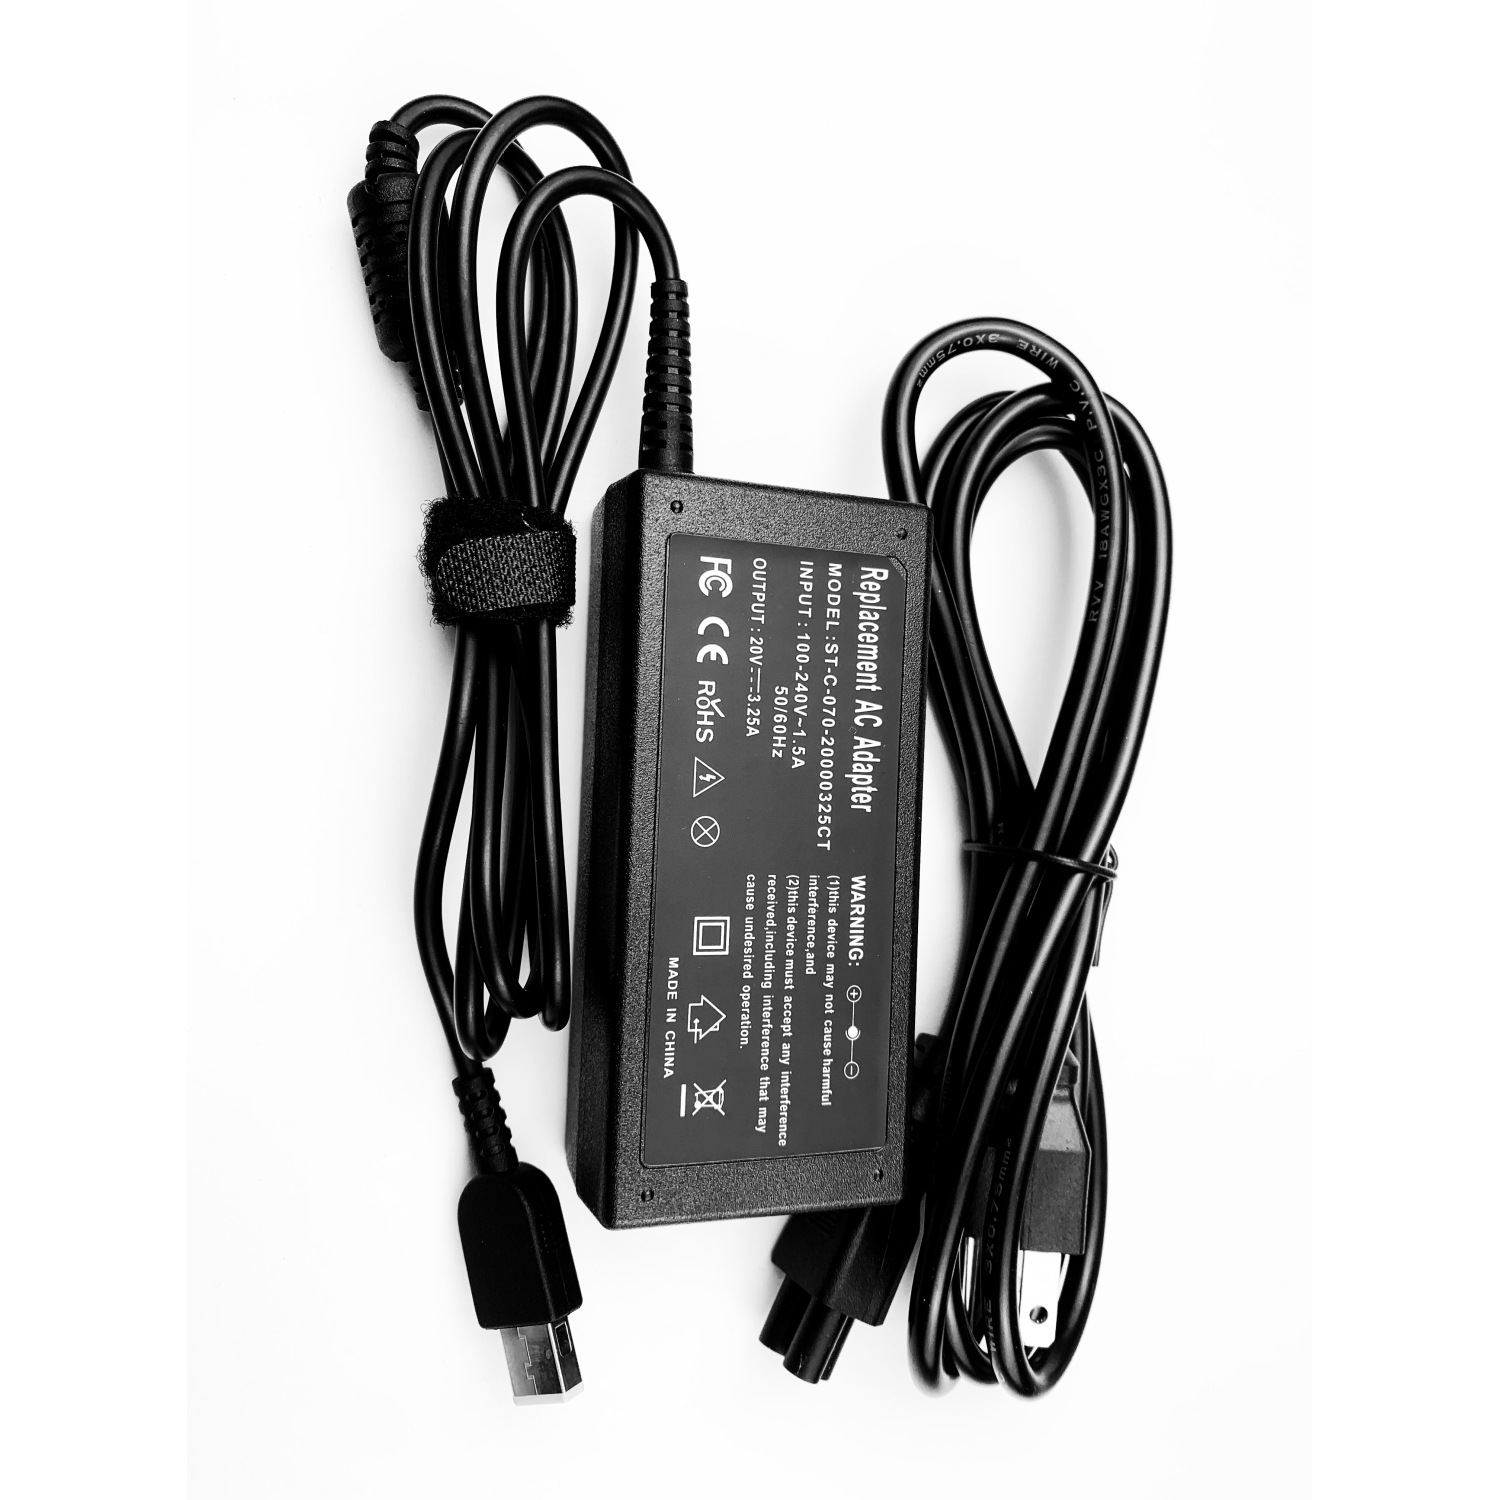 65W AC adapter charger for Lenovo Flex 15D G40 G50 G51